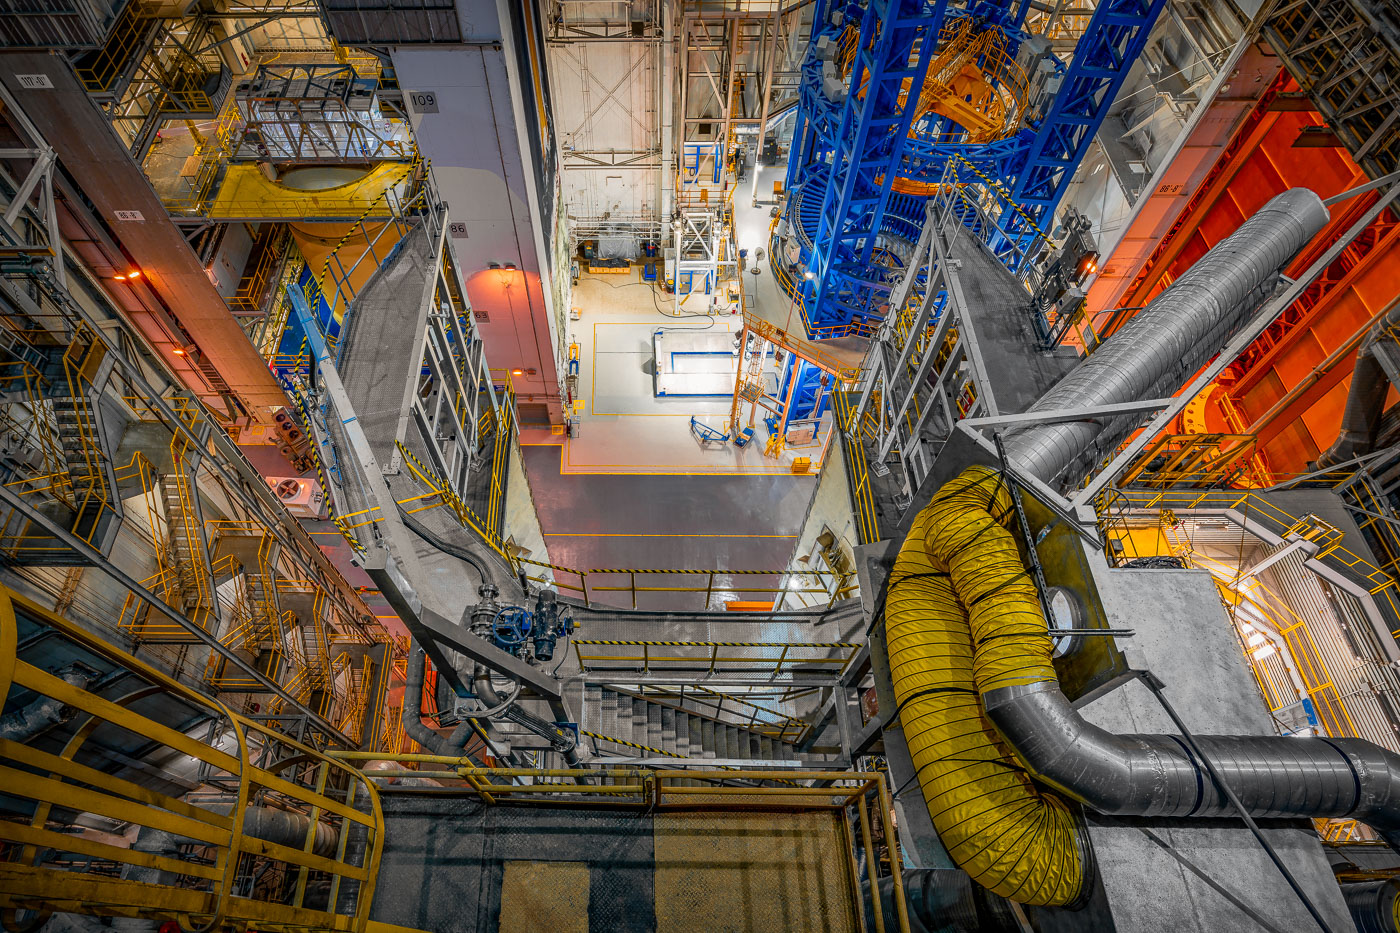 A Liquid Oxygen tank being worked on inside Cell A at NASA’s Michoud Assembly Facility. It’s part of the Space Launch System Core Stage. The tank will hold 195,000 gallons of liquid oxygen cooled to -297 degrees Fahrenheit.